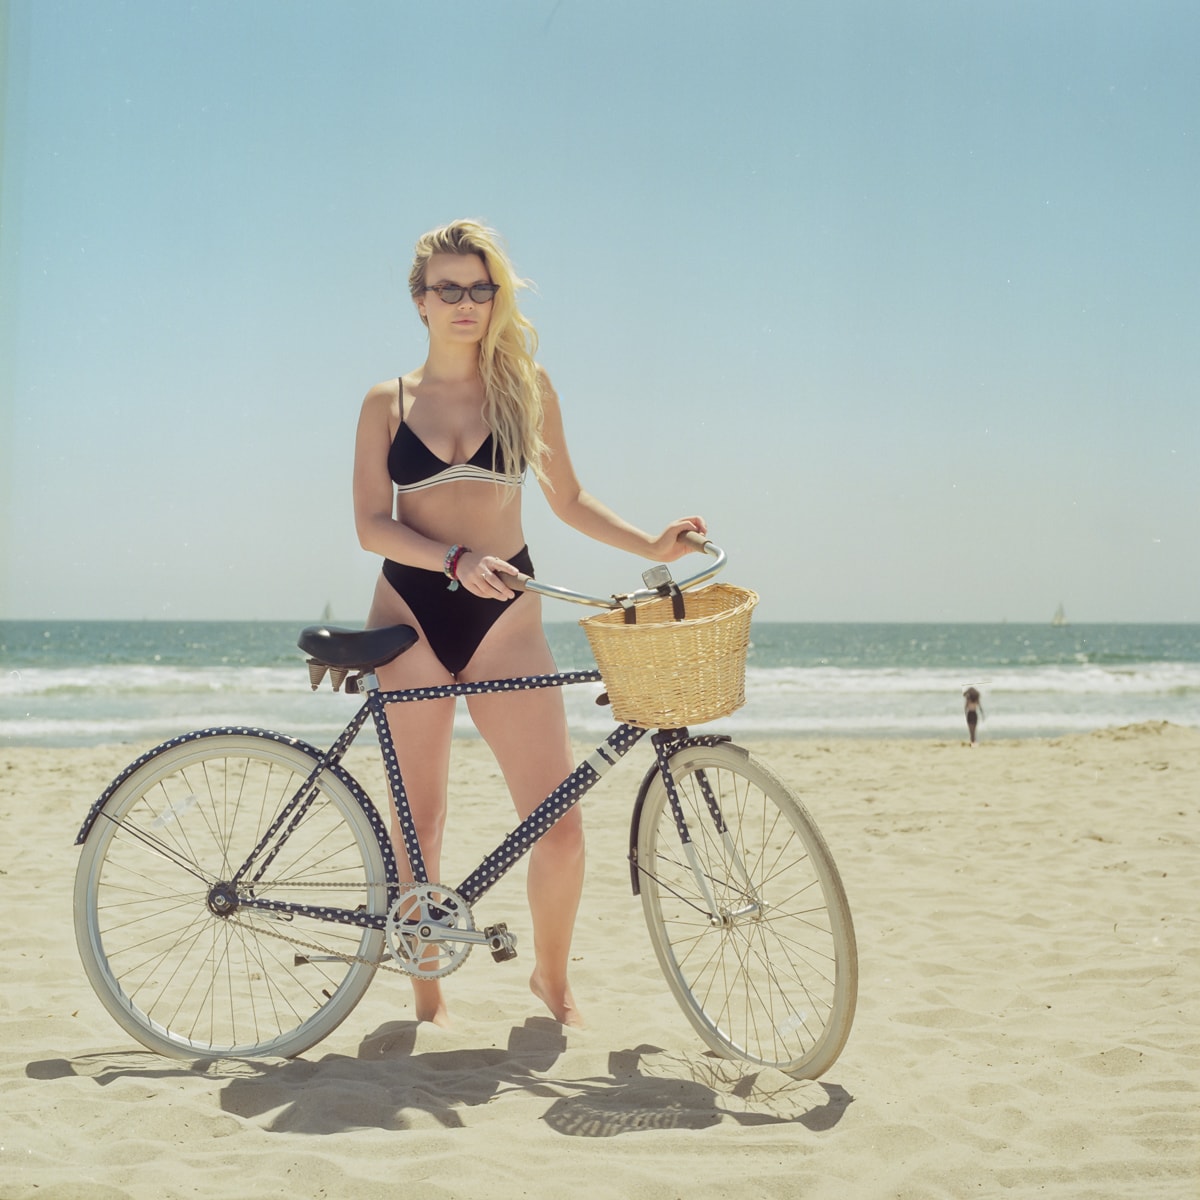 A portrait of a woman with her bike on the beach